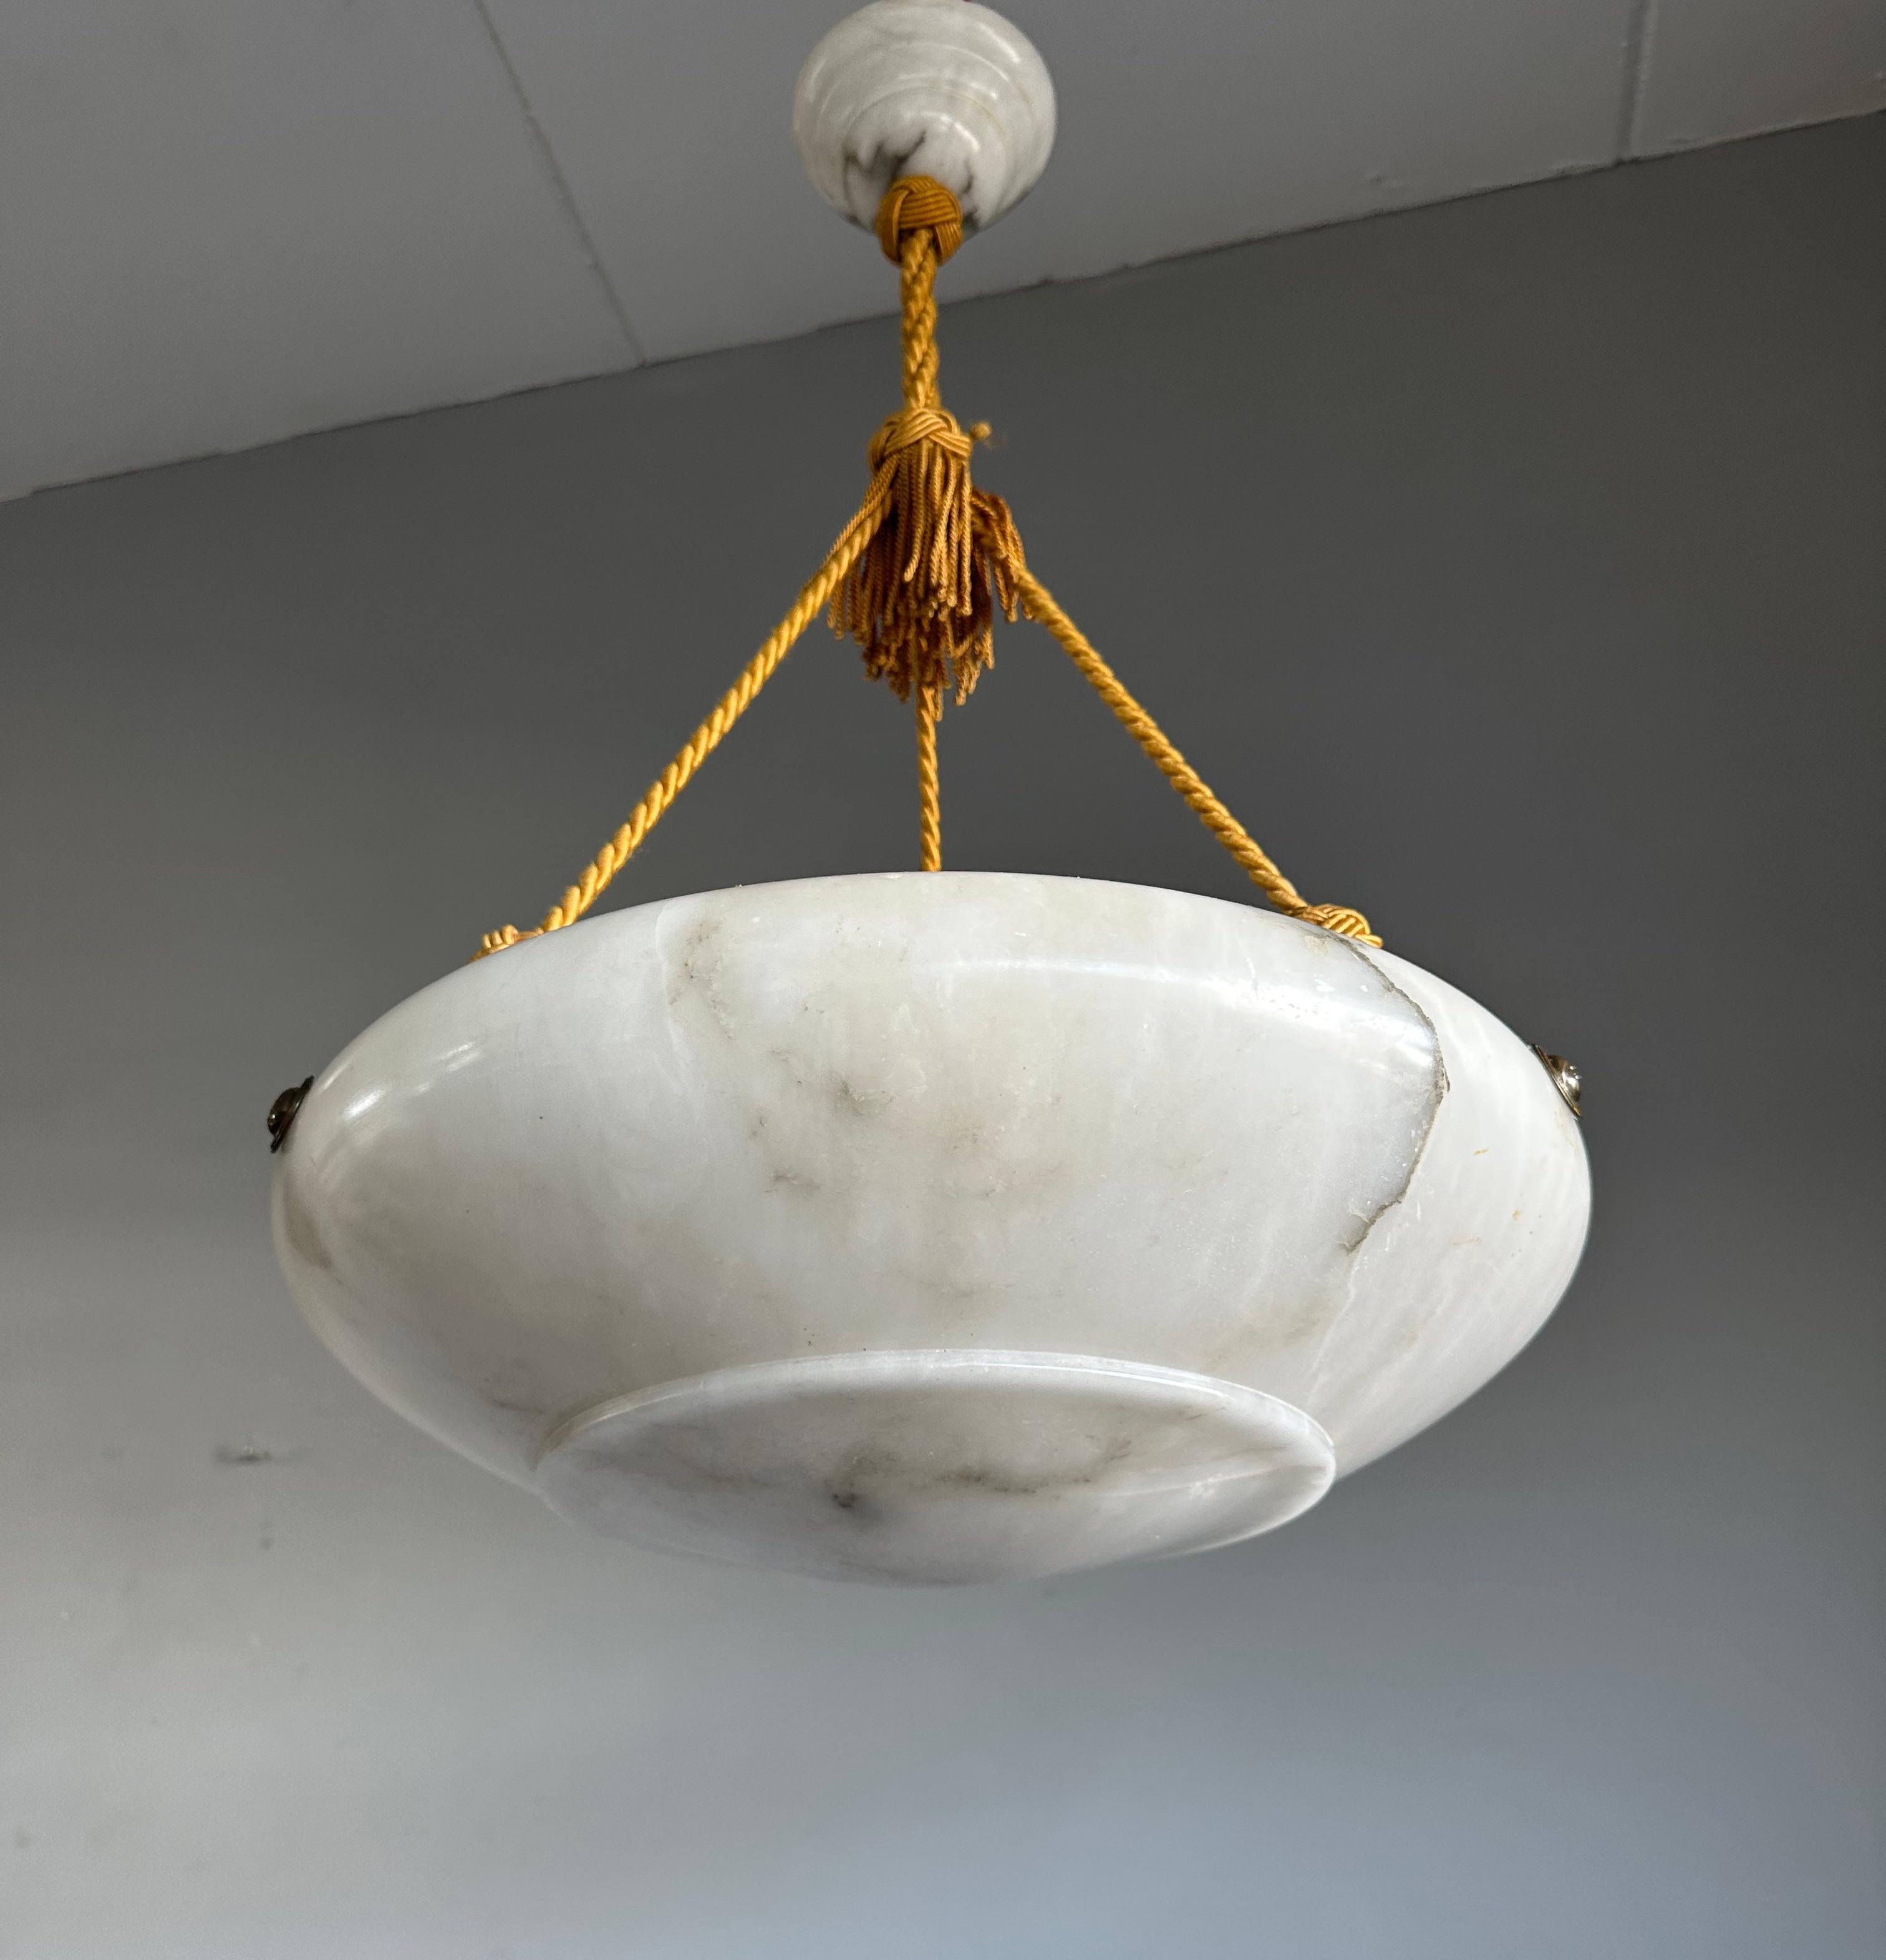 Top class design and superb quality, large white alabaster 3-light chandelier.

This early 20th century pendant light comes with a wonderful design and a superb condition, white alabaster shade with stunning veins. The mint and original matching